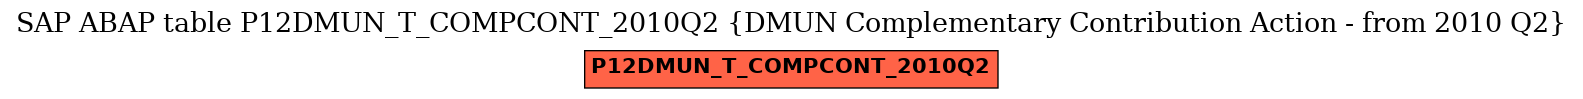 E-R Diagram for table P12DMUN_T_COMPCONT_2010Q2 (DMUN Complementary Contribution Action - from 2010 Q2)